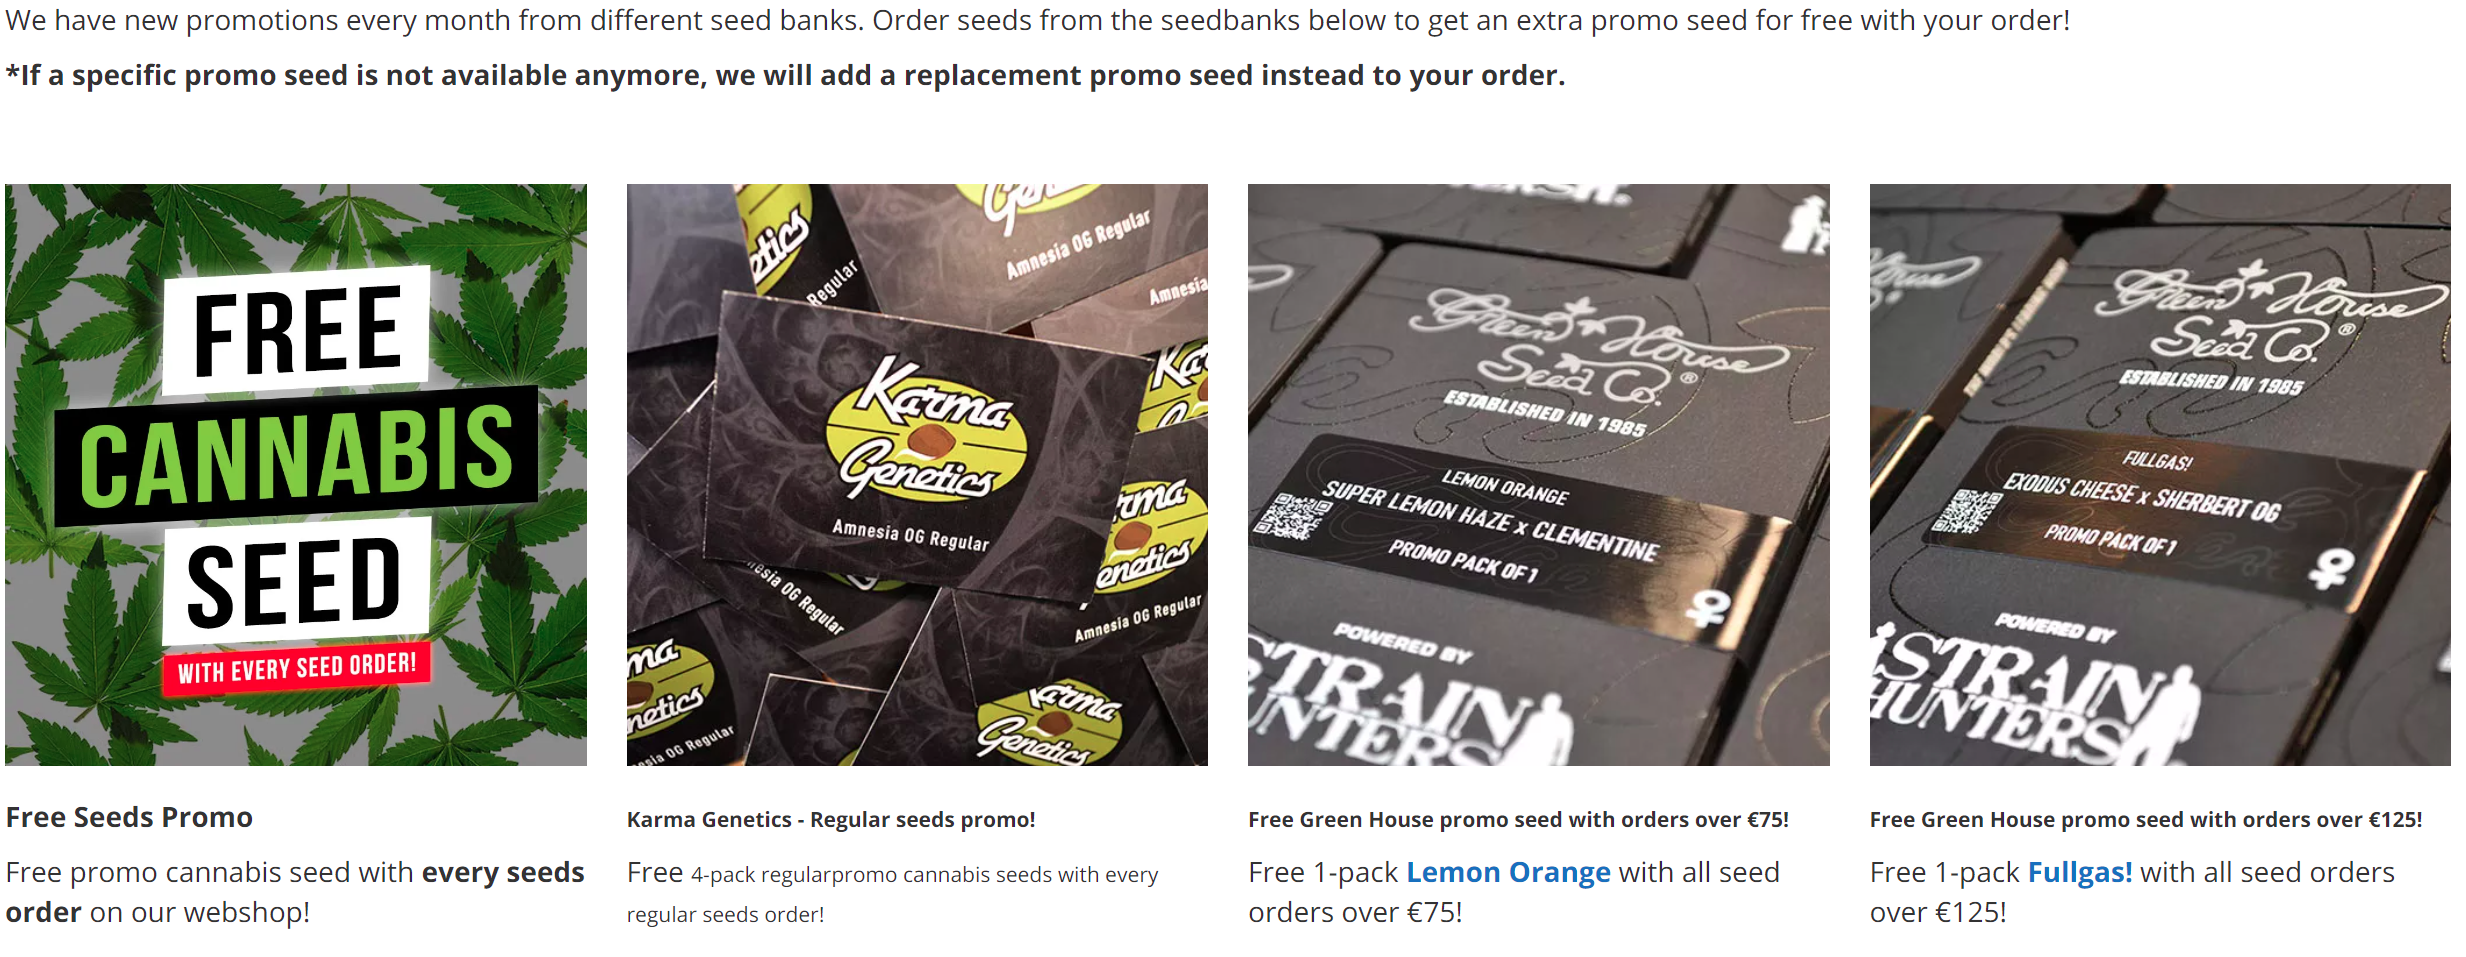 Free Cannabis Seeds From Special Offers By Seed Banks